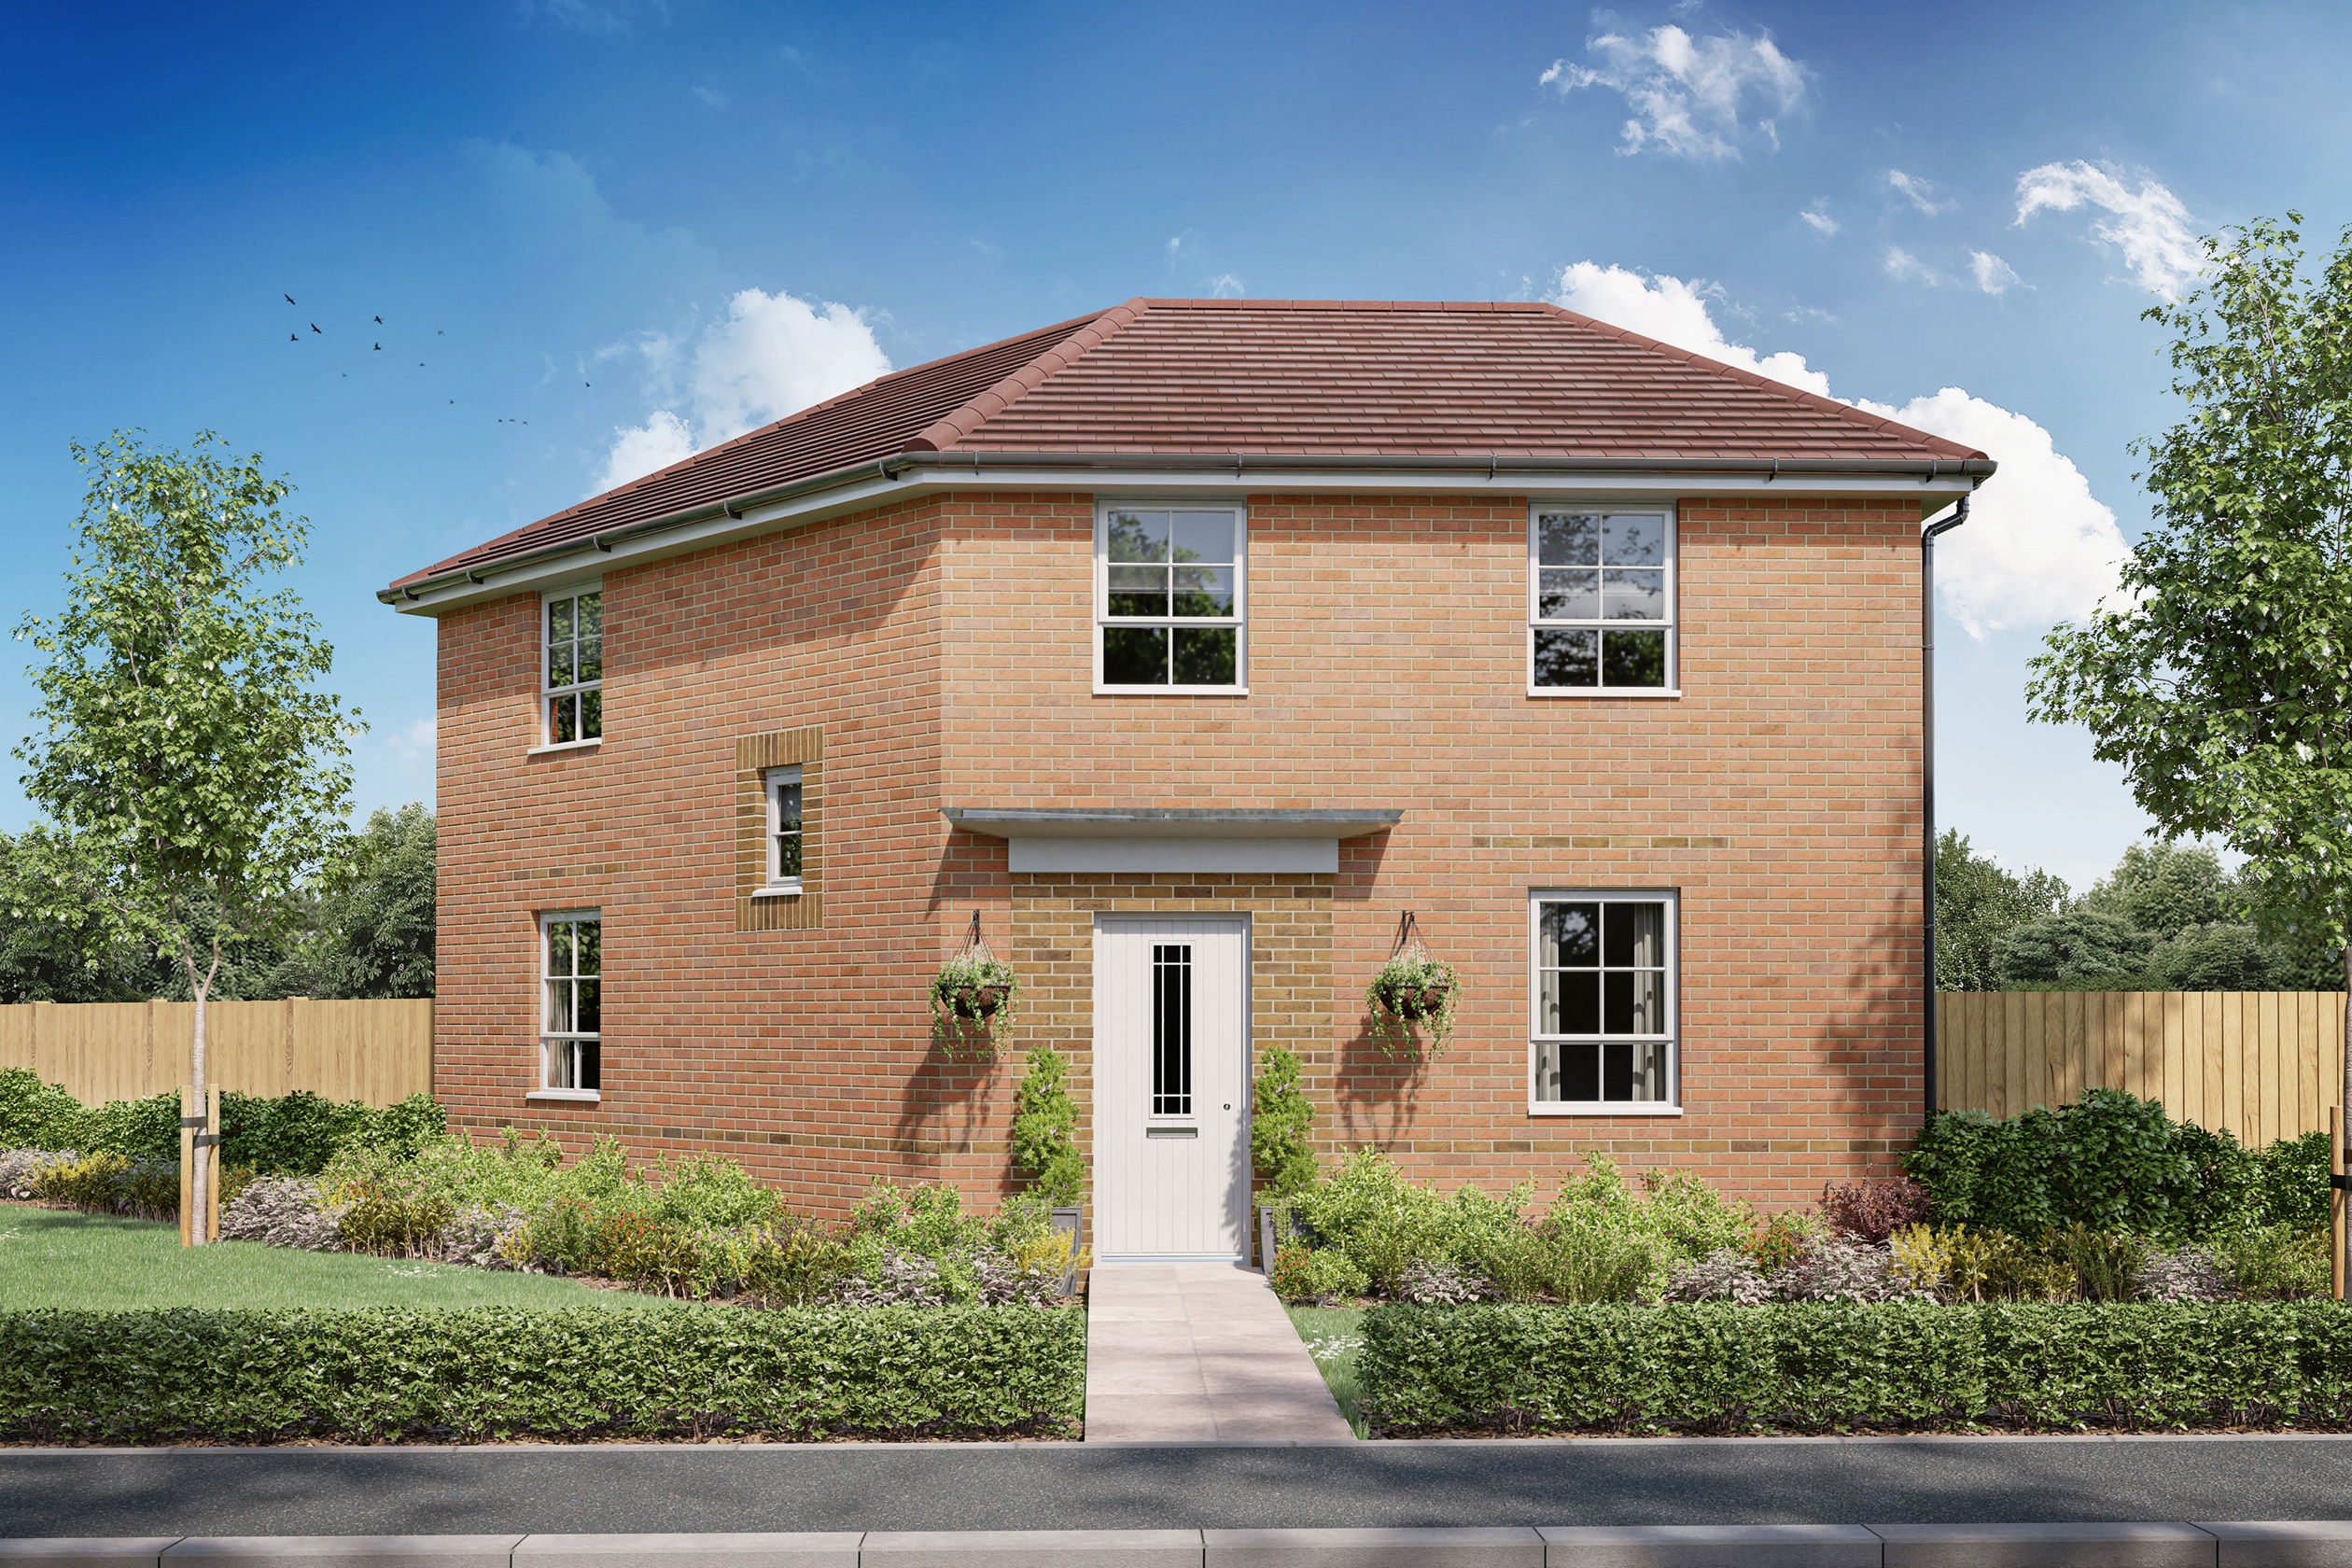 Property 1 of 8. Exterior CGI View Of Our 3 Bed Lutterworth Home